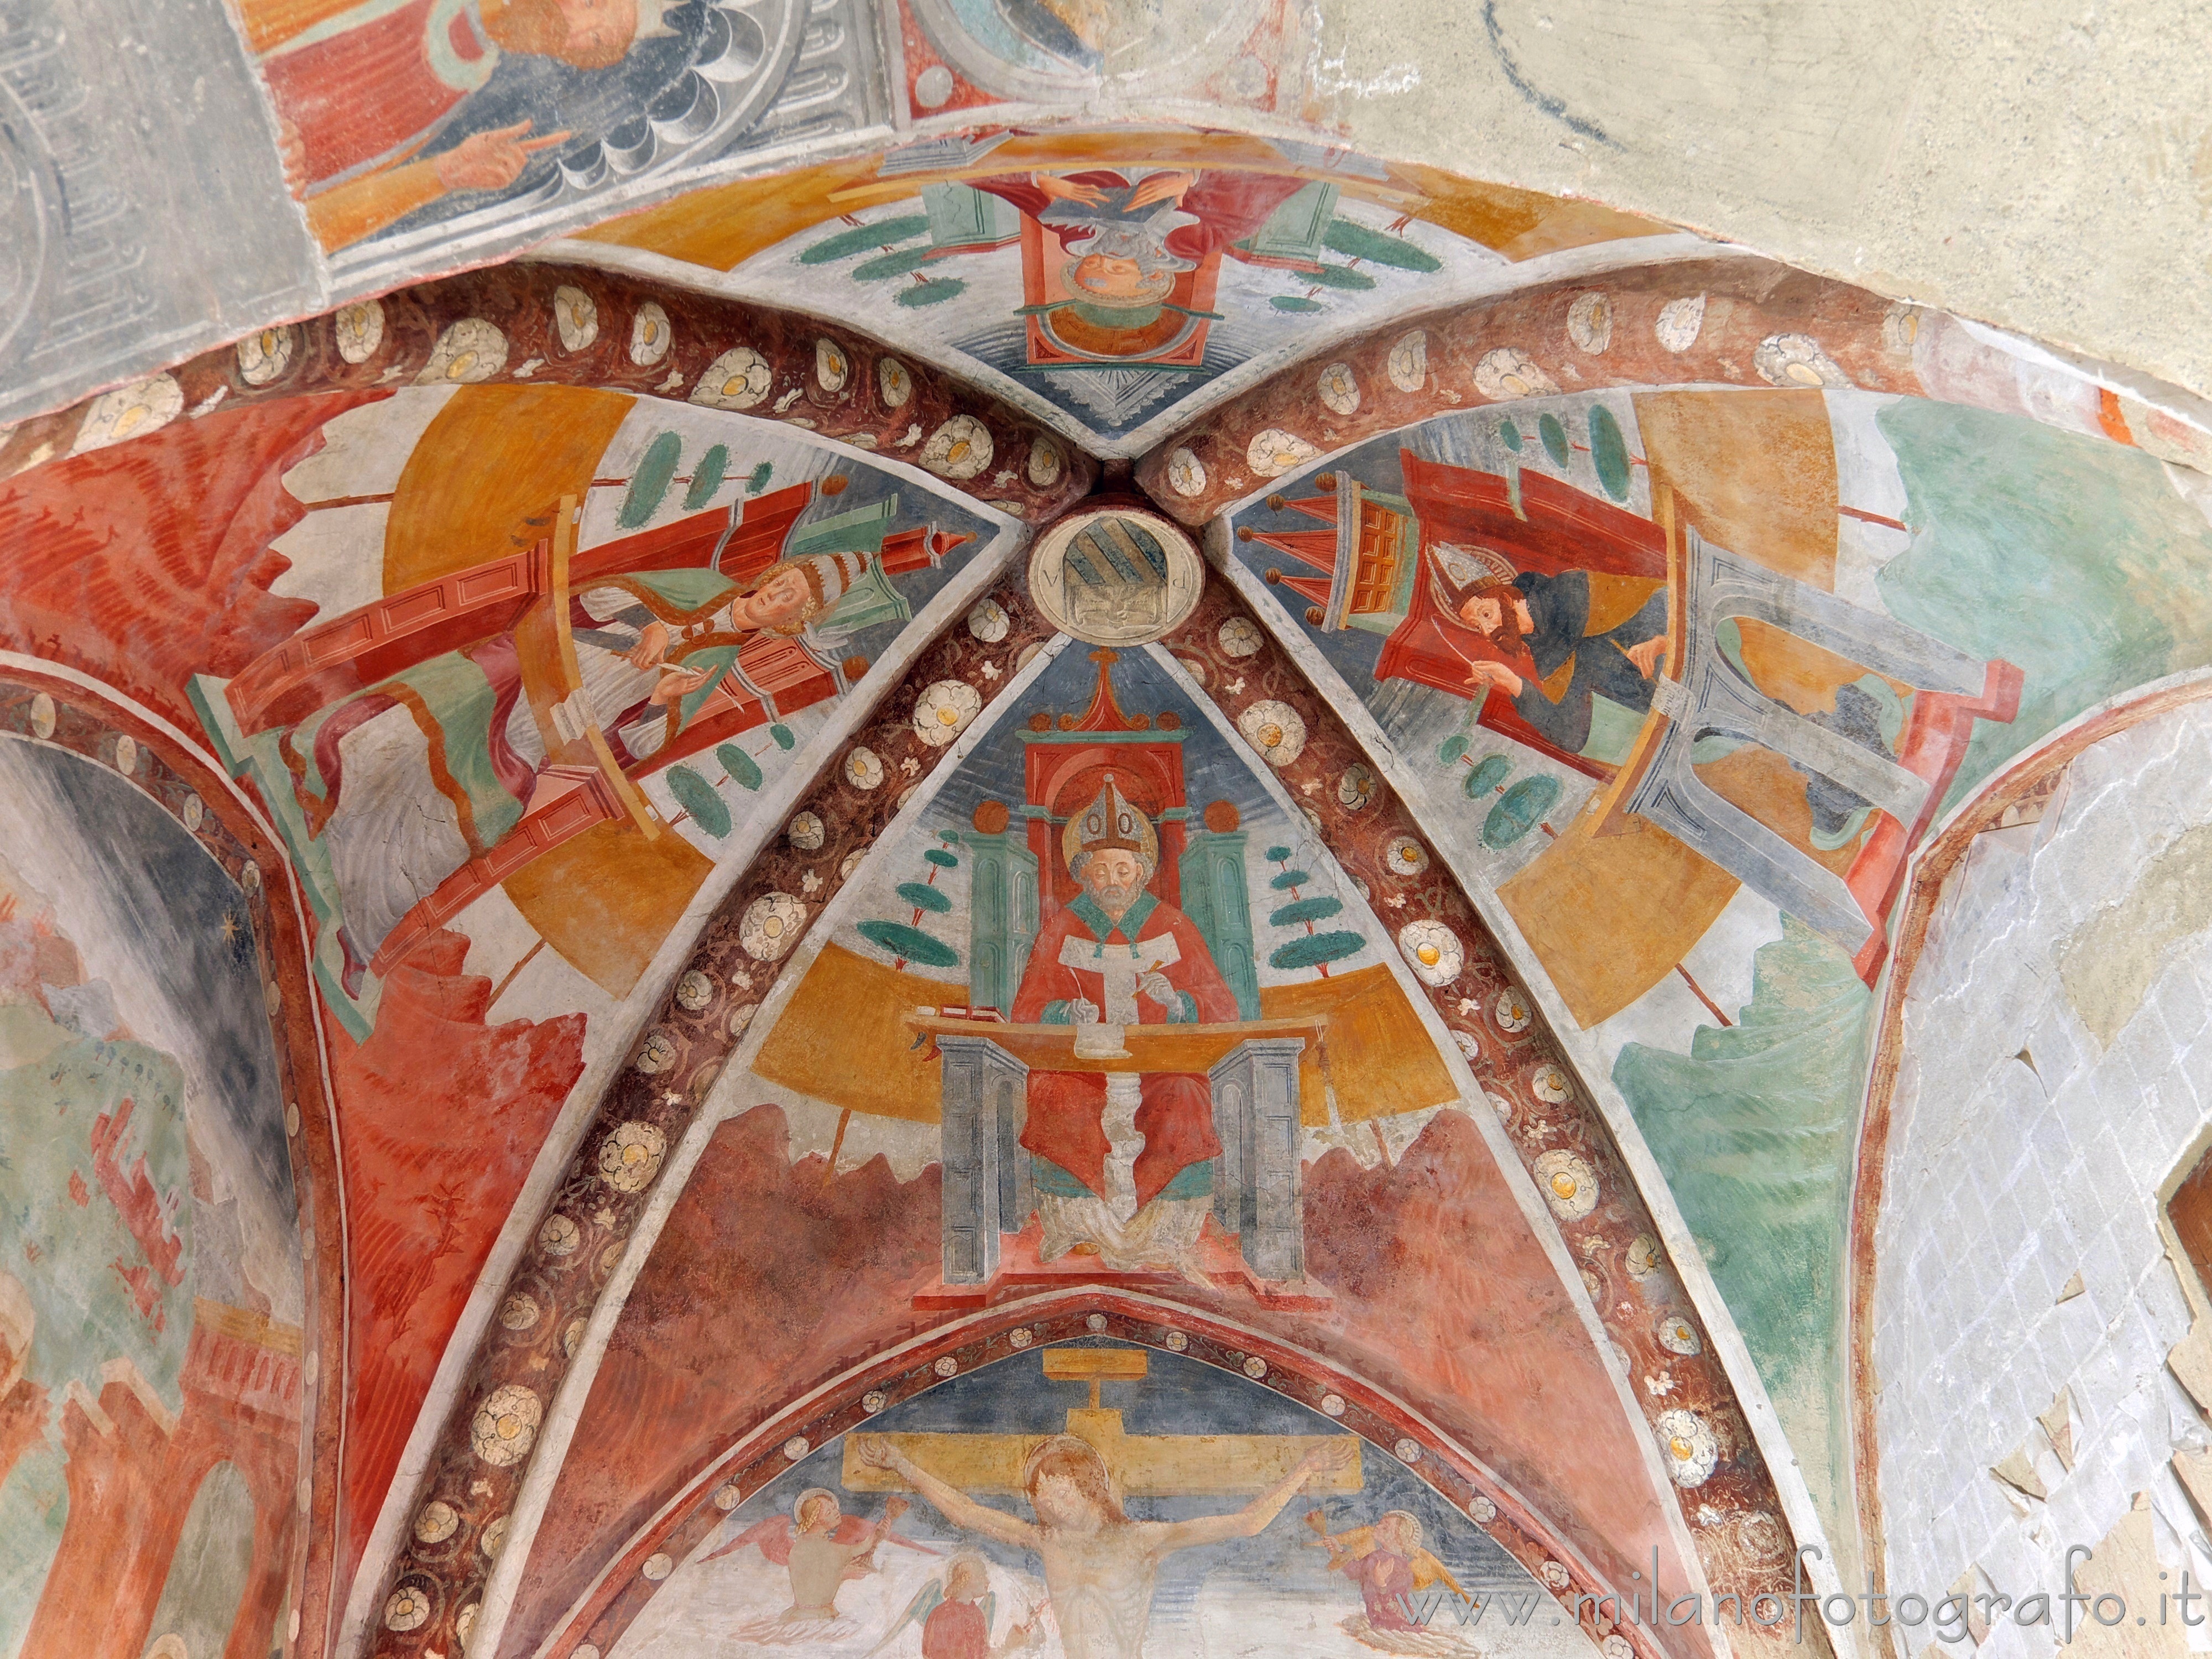 Settimo Milanese (Milan, Italy): Frescoed vault of the presbytery of the Oratory of San Giovanni Battista - Settimo Milanese (Milan, Italy)